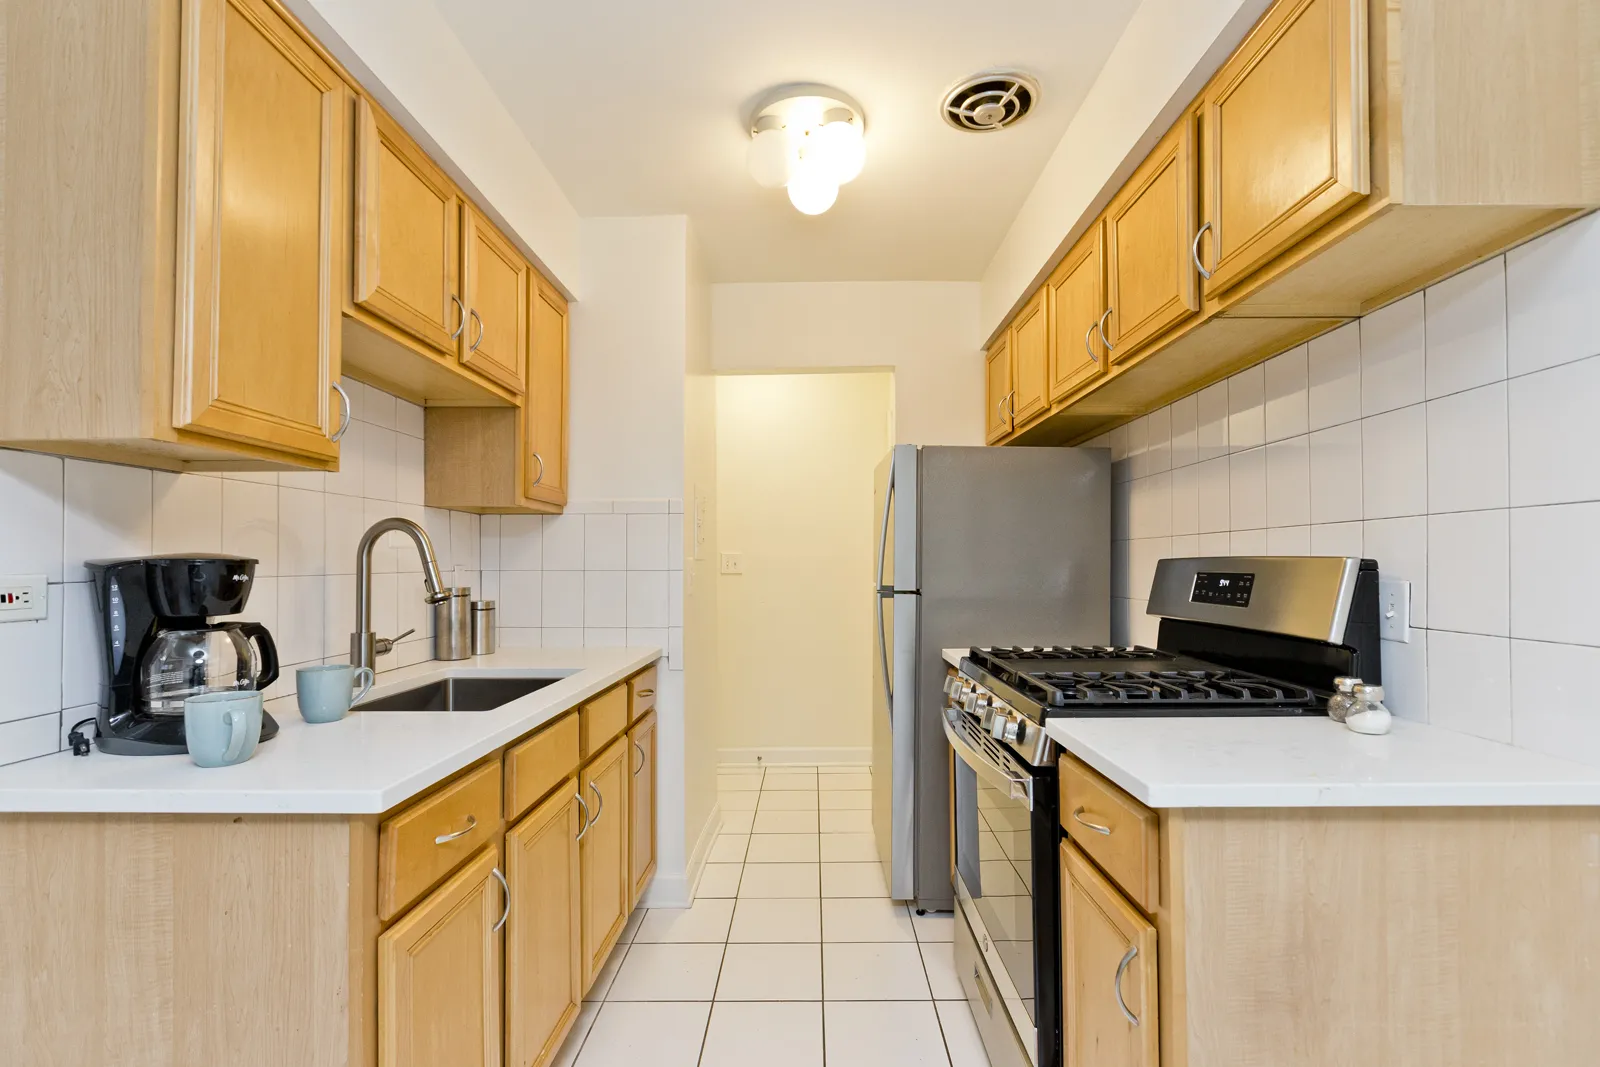 5423 N WINTHROP AVE 60640-Winthrop Station-Chicago-IL